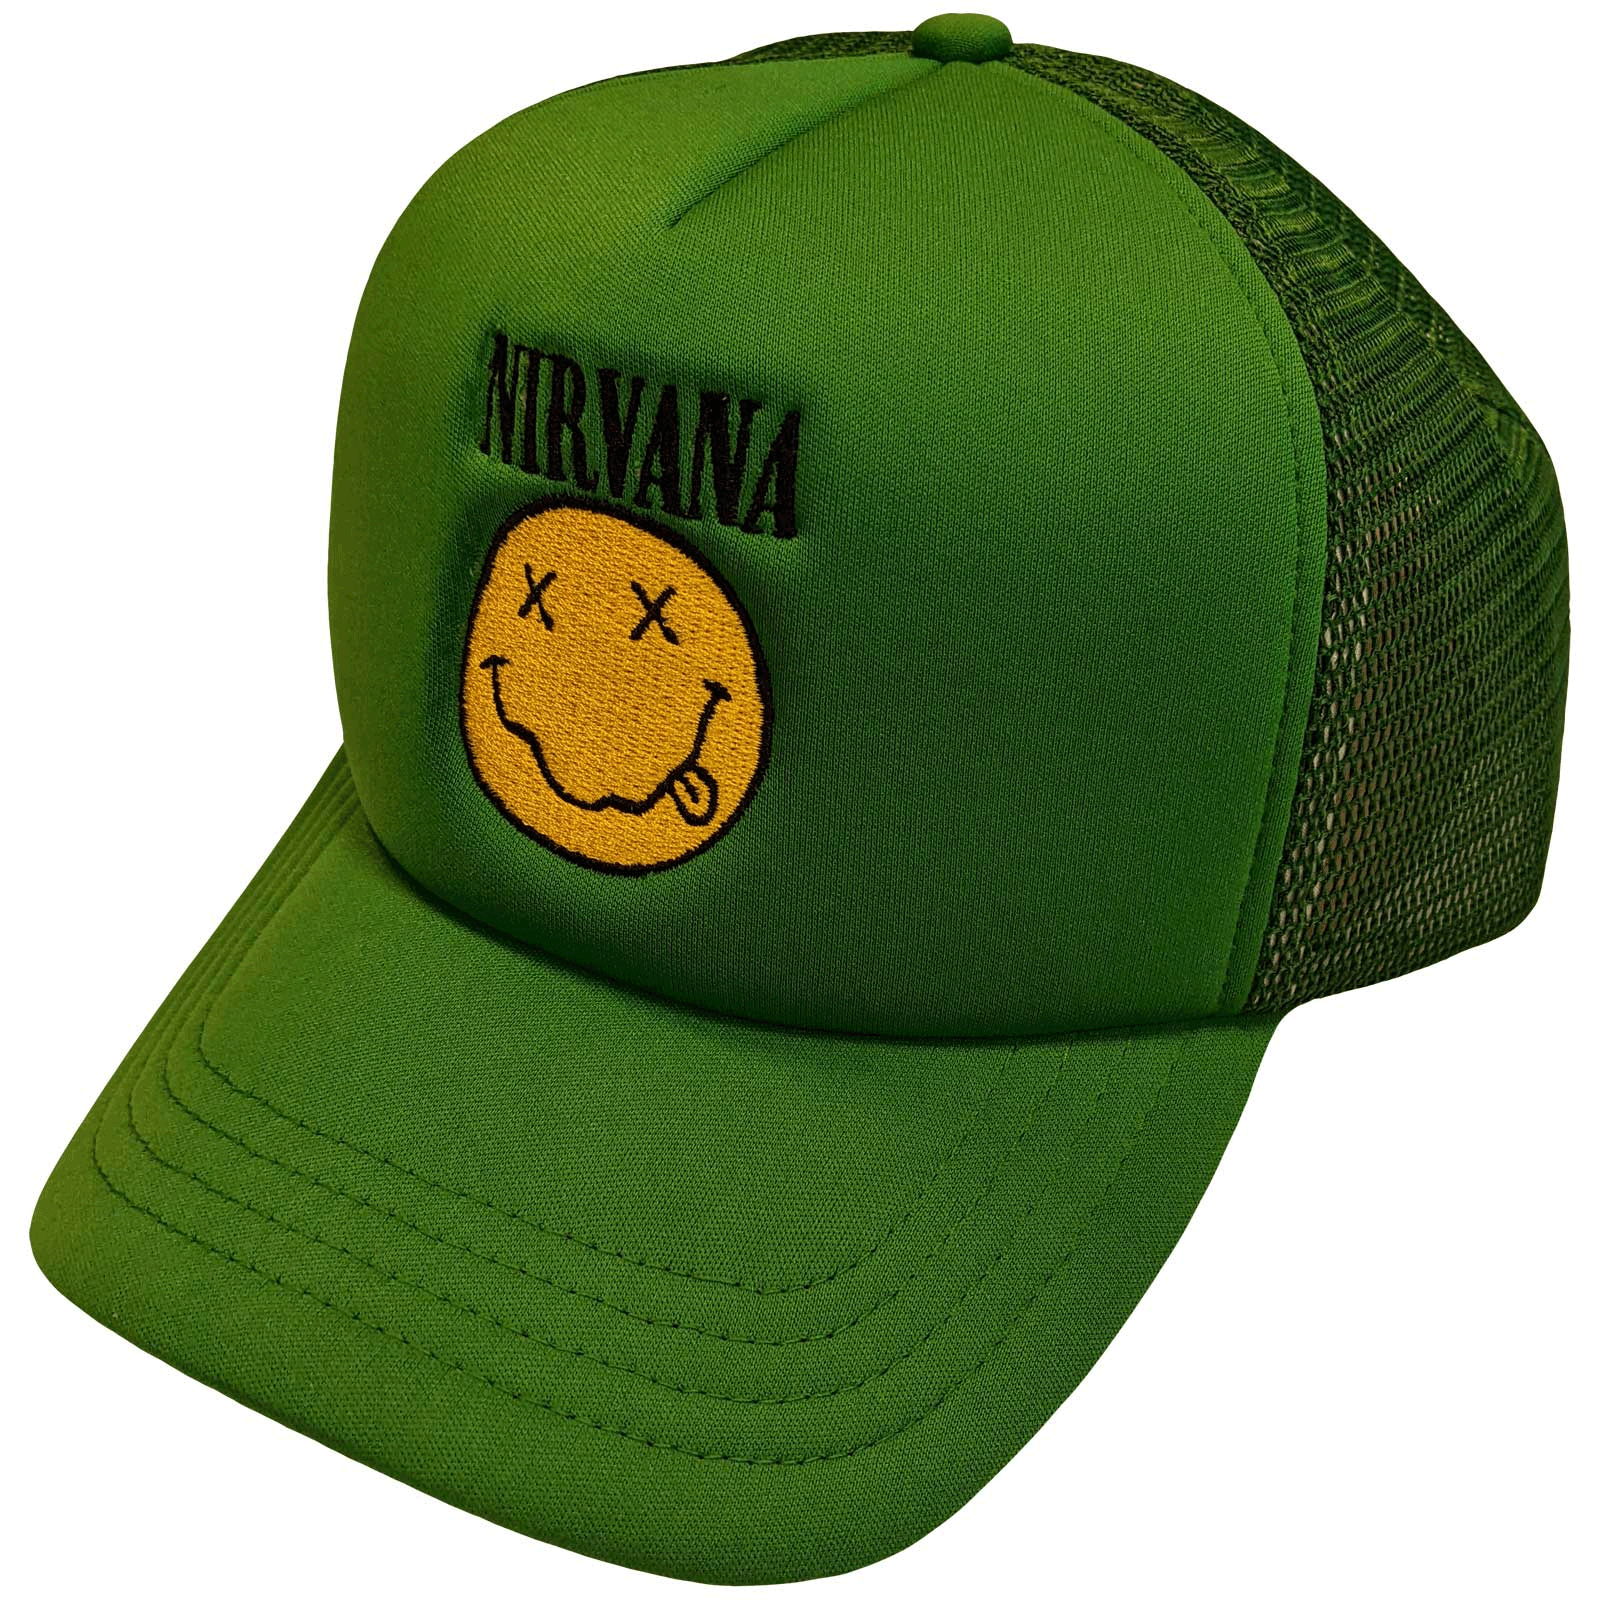 NIRVANA logo and happy face/green mesh back CAP - Unkind - Merchandise ...